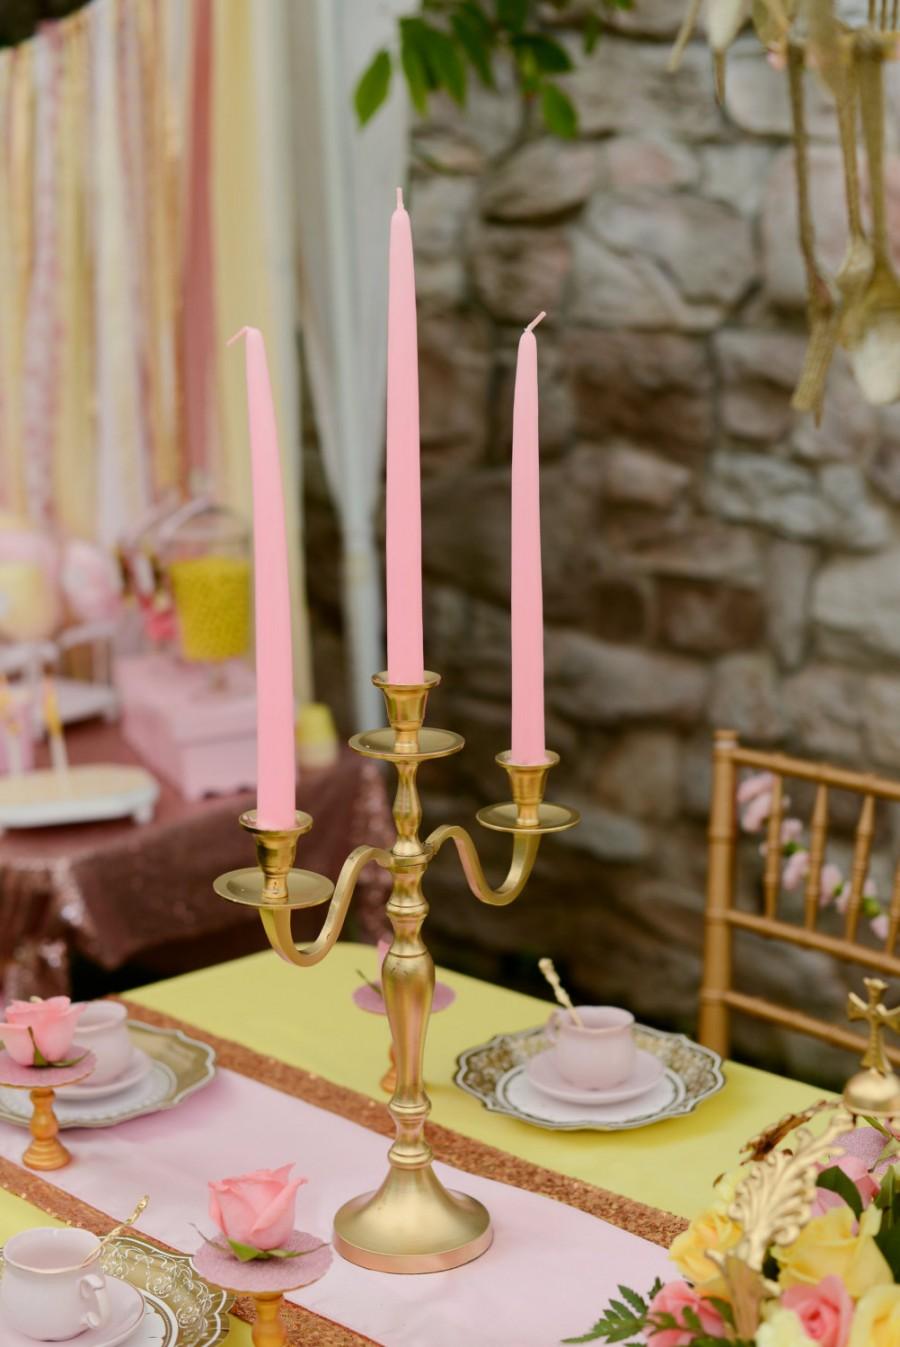 Hochzeit - Gold Wedding Candle Candelabras 3 arm Shabby Candle Holder Party Candle Holder Birthday Candle Holder - $25.00 USD